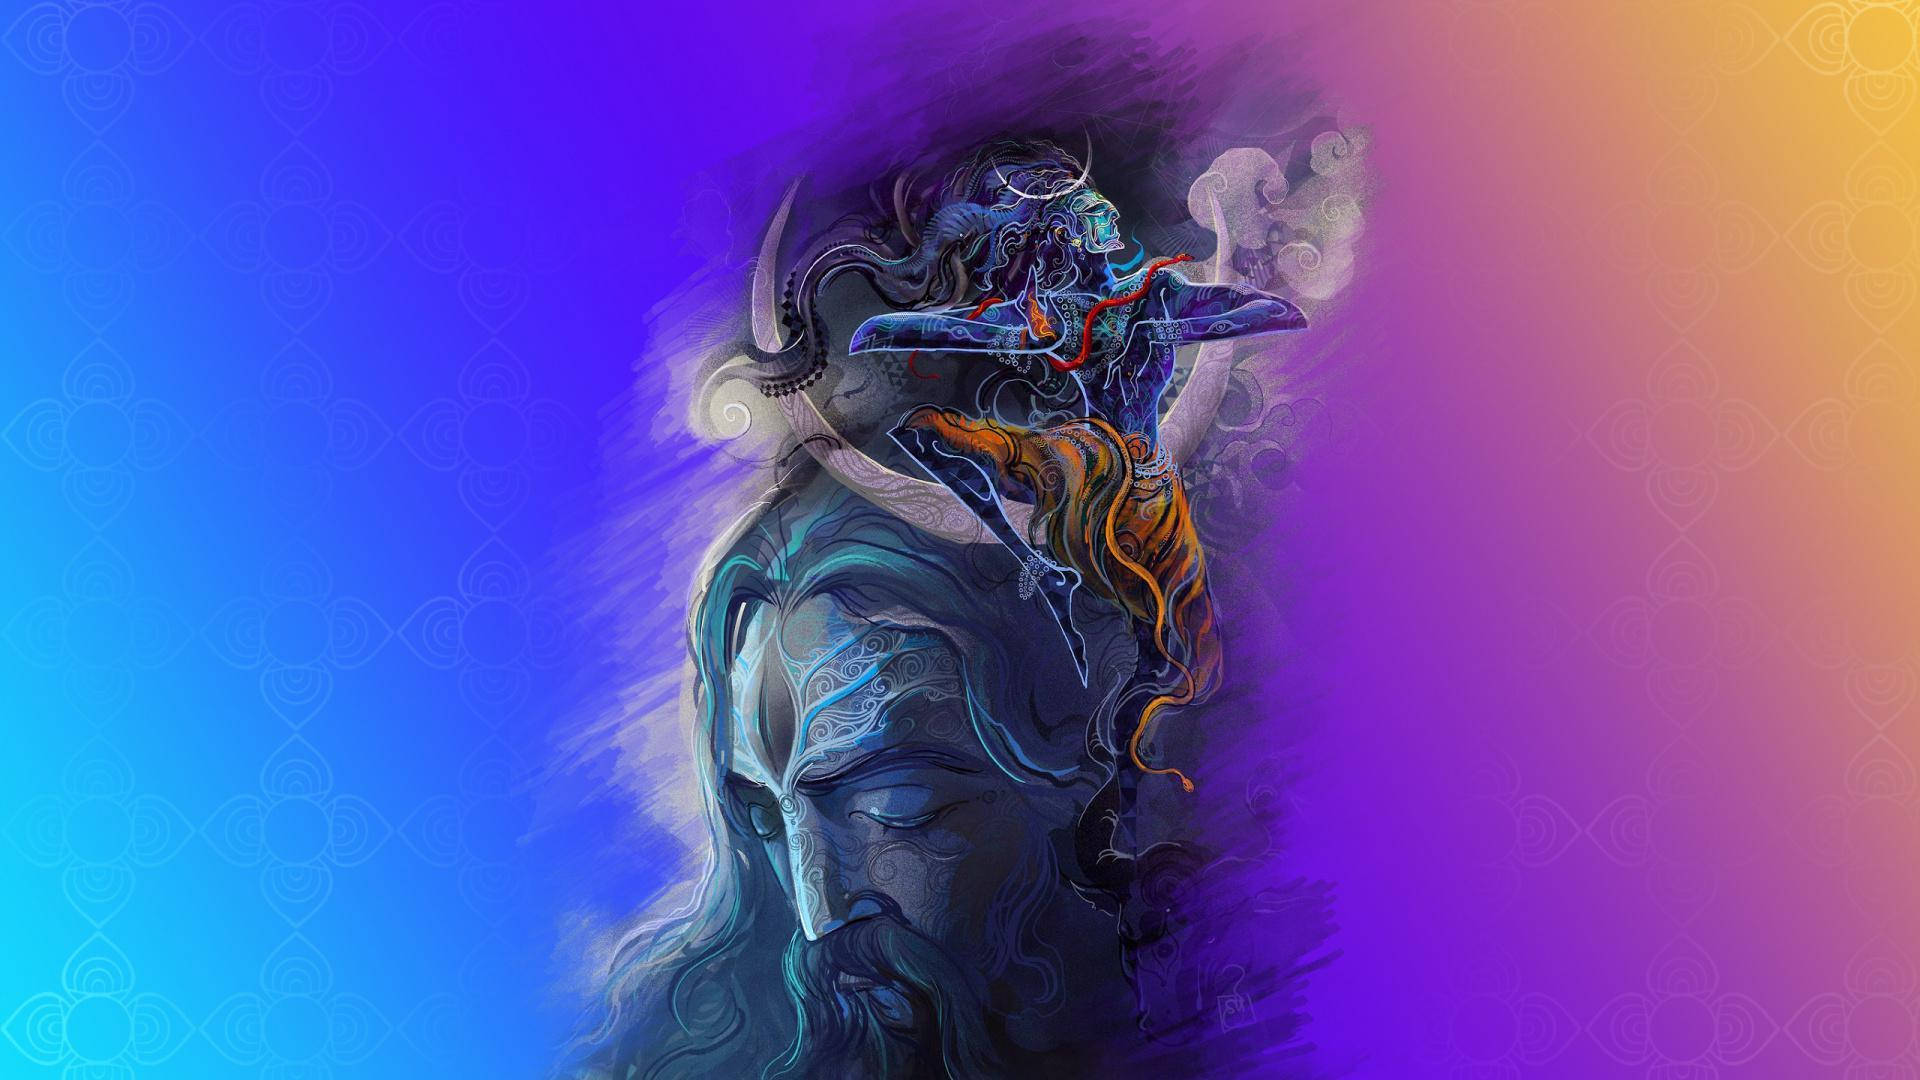 Mahakaal Painting On Gradient Background Hd